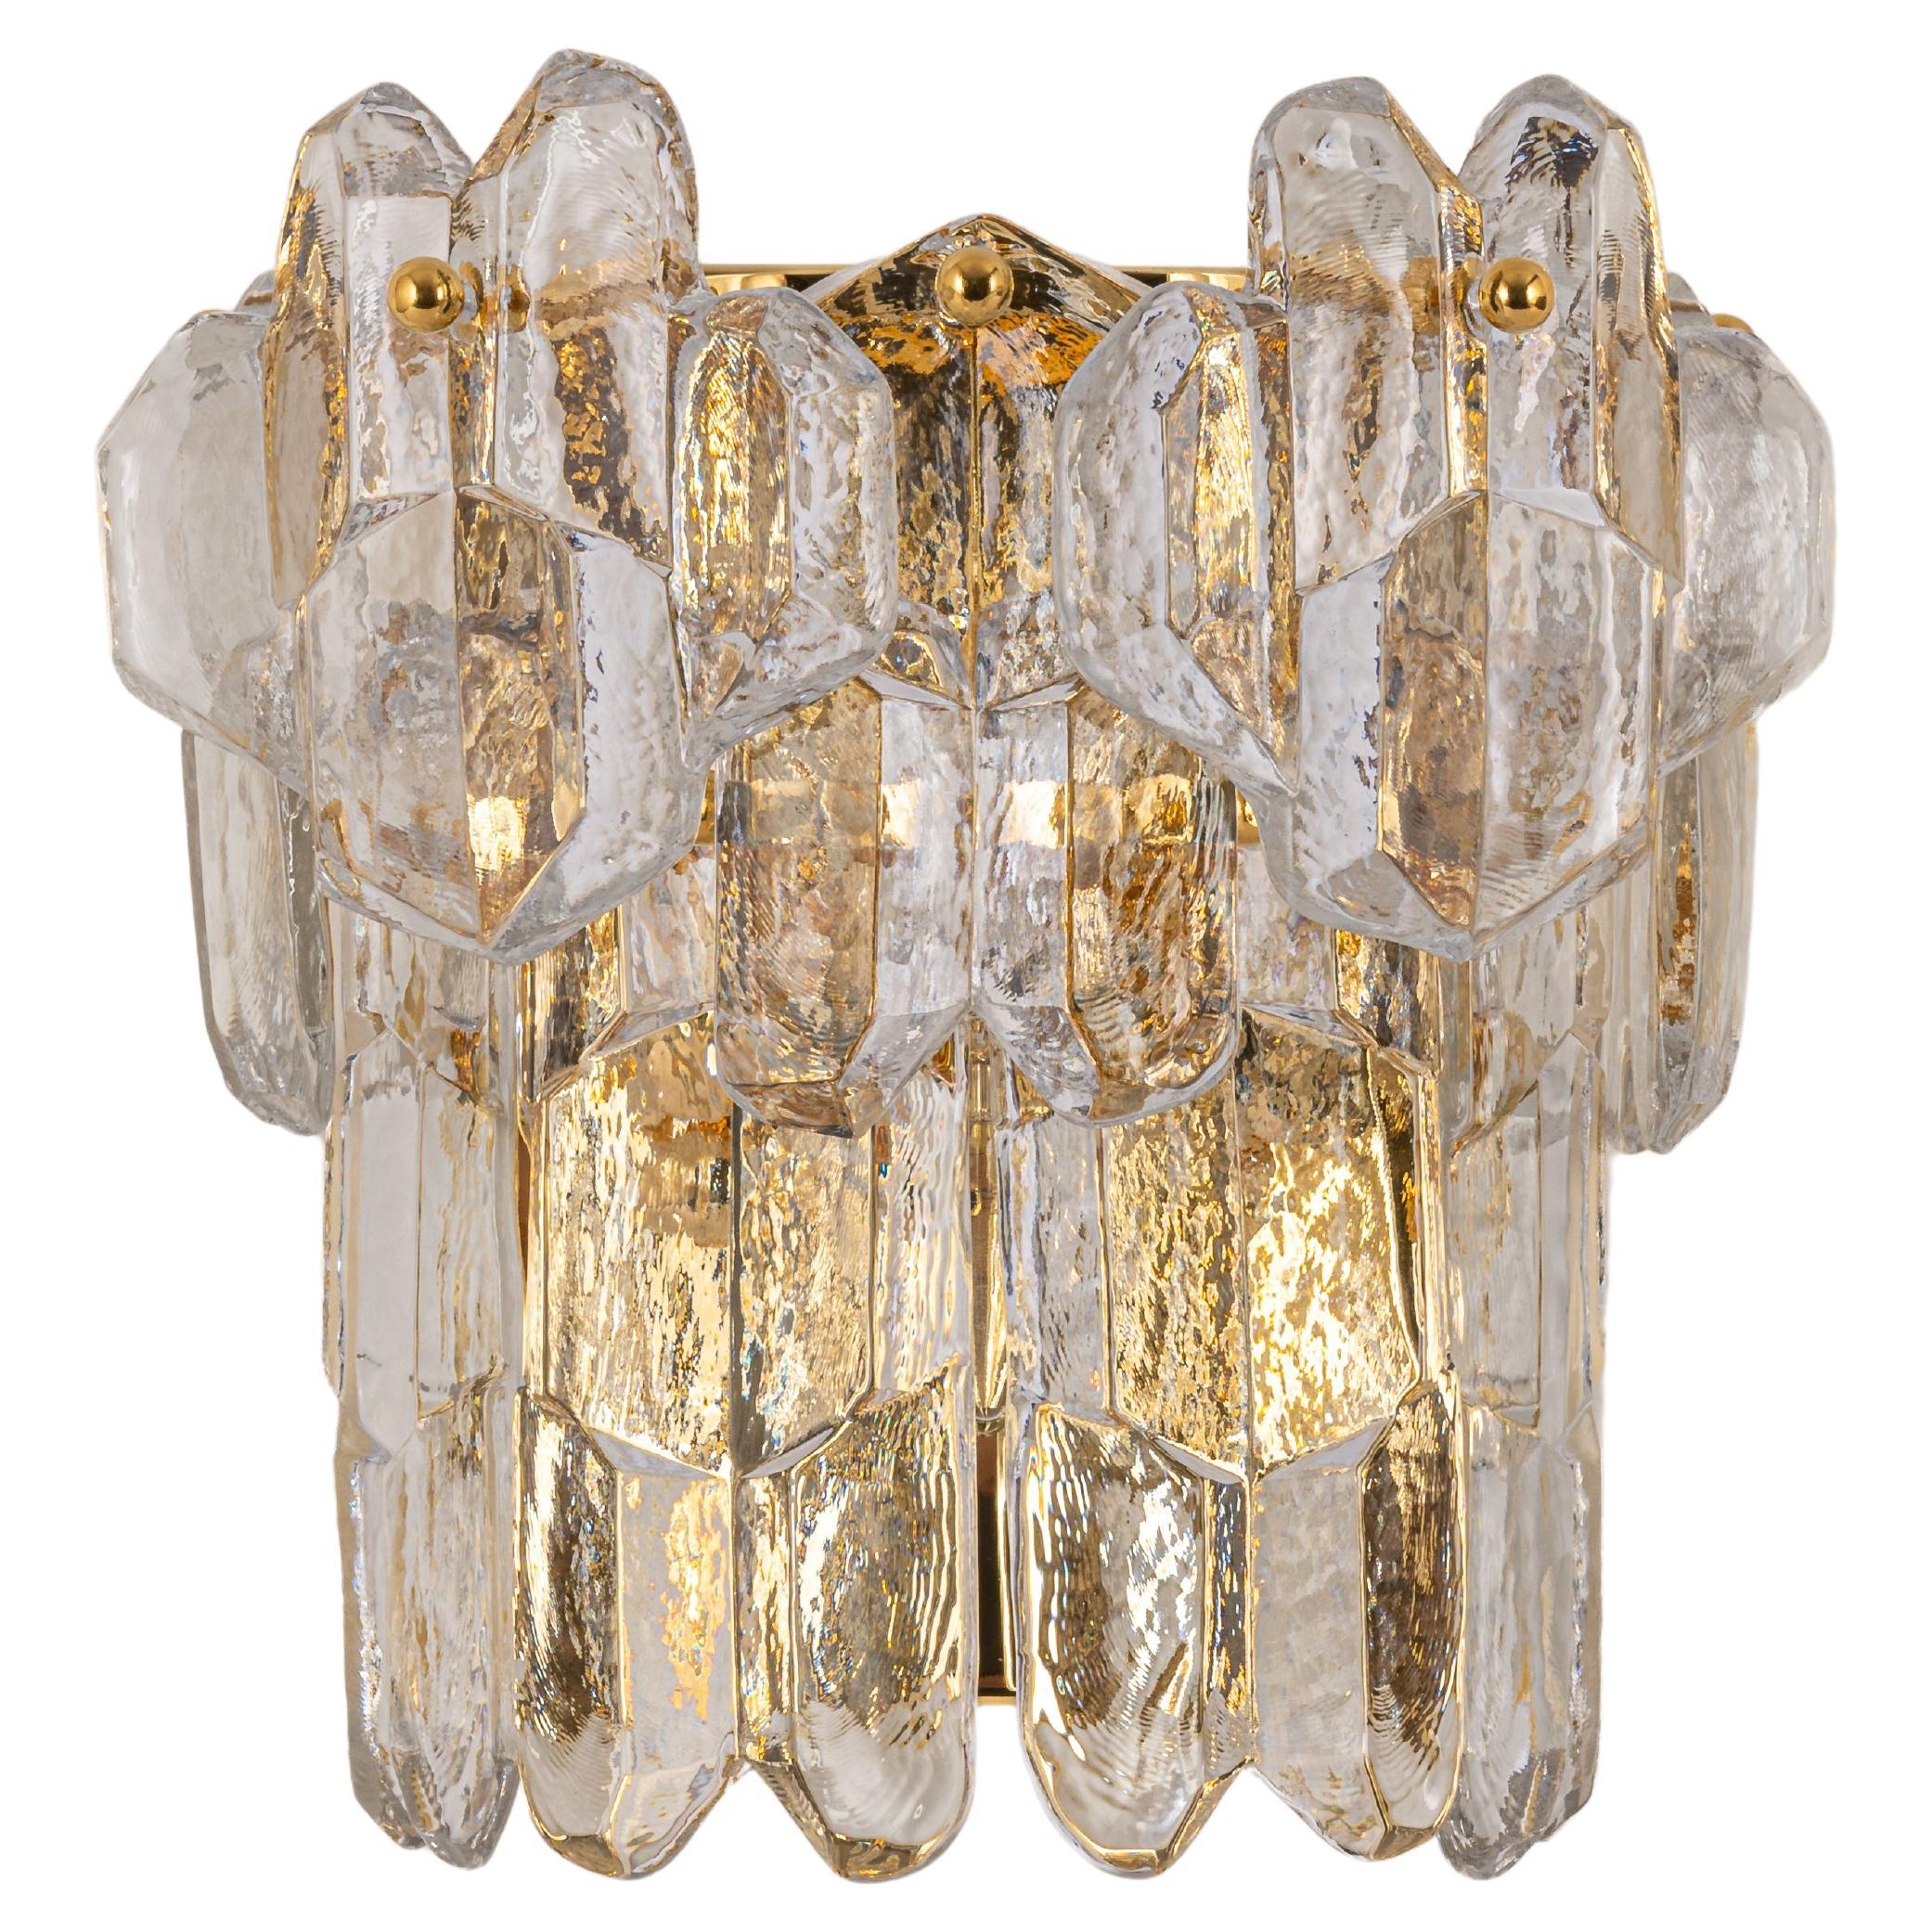 1 of 2 Pairs of Large Kalmar Sconces Wall Lights 'Palazzo', Austria, 1970s For Sale